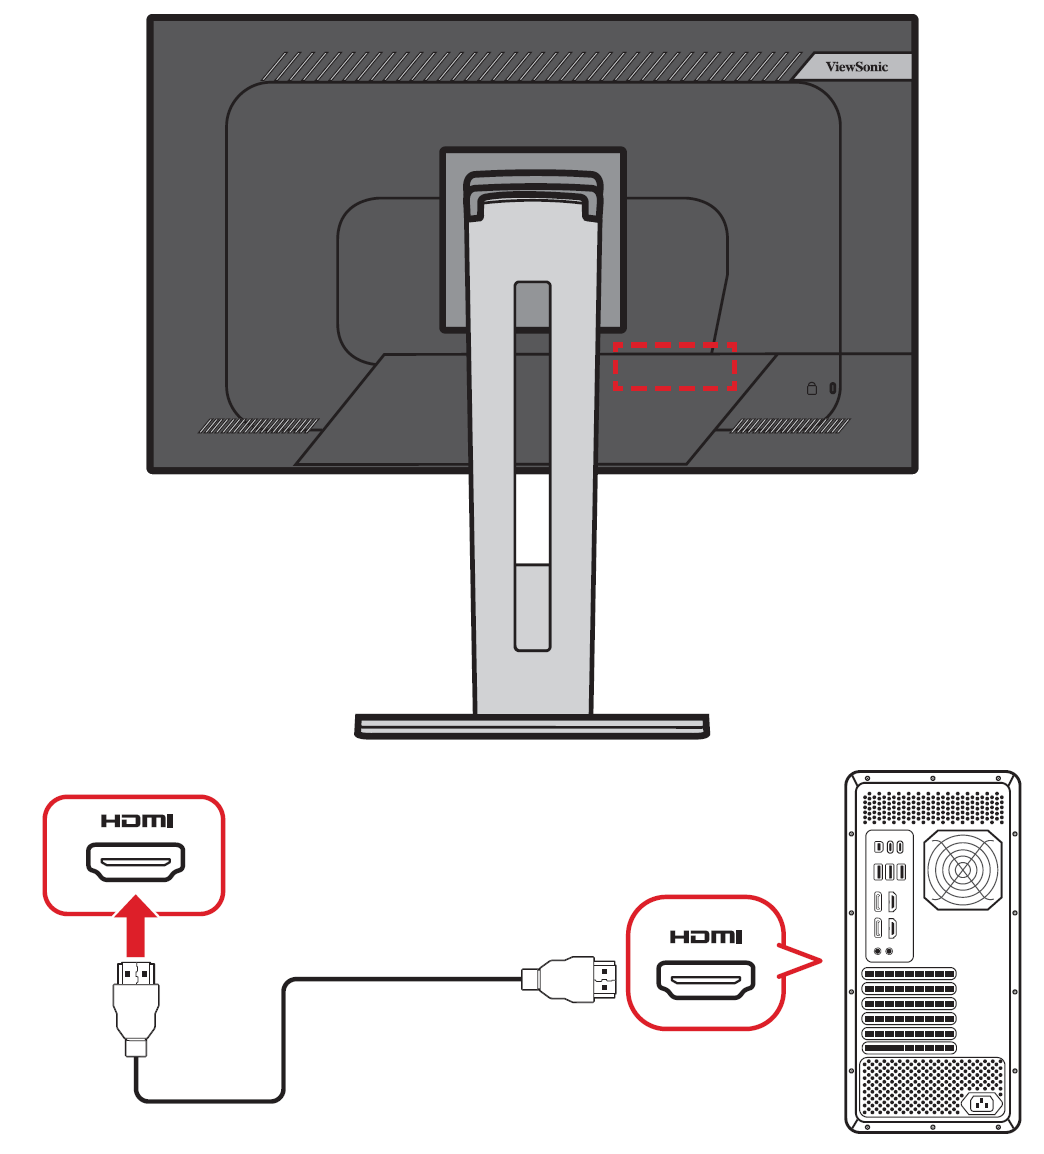 Connecting to HDMI